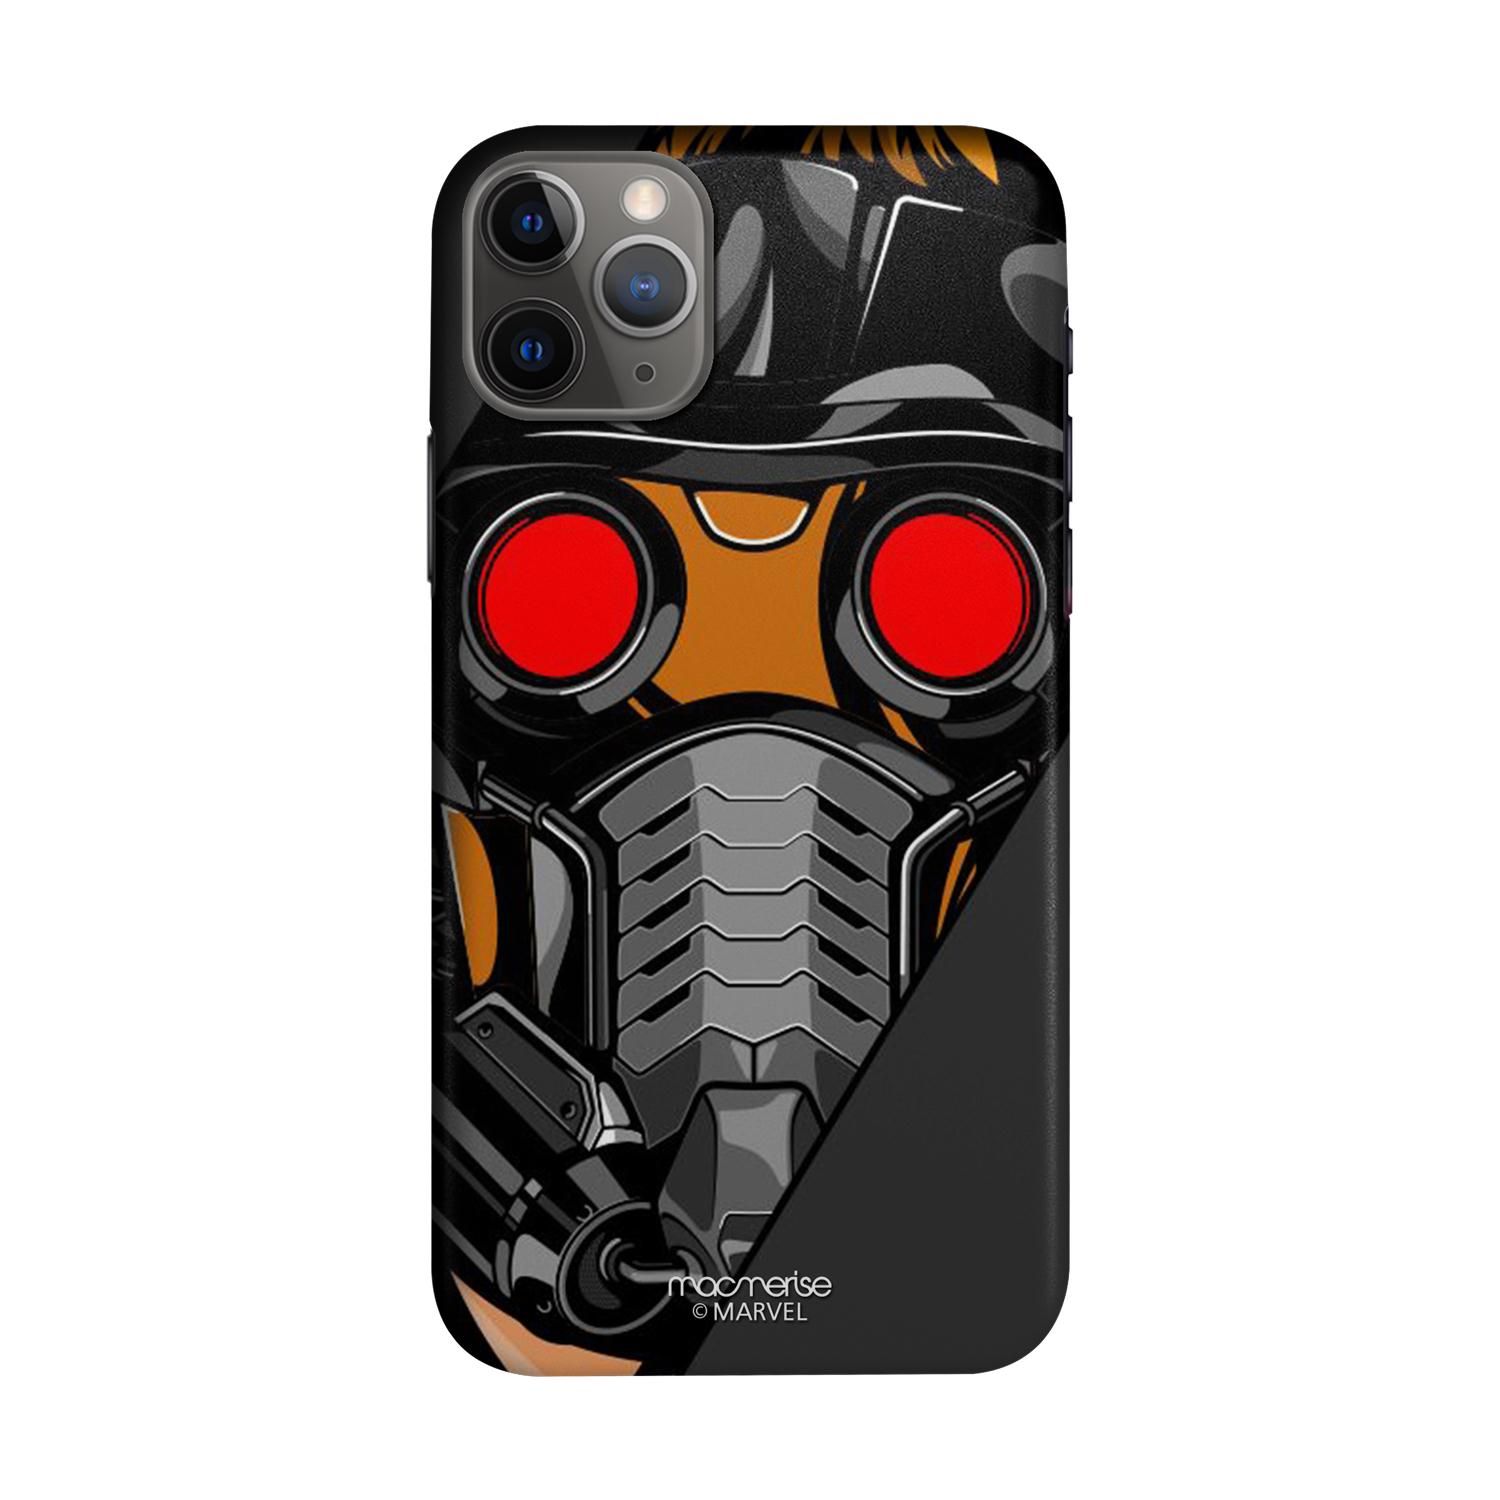 Buy Legendary Star Lord - Sleek Phone Case for iPhone 11 Pro Max Online